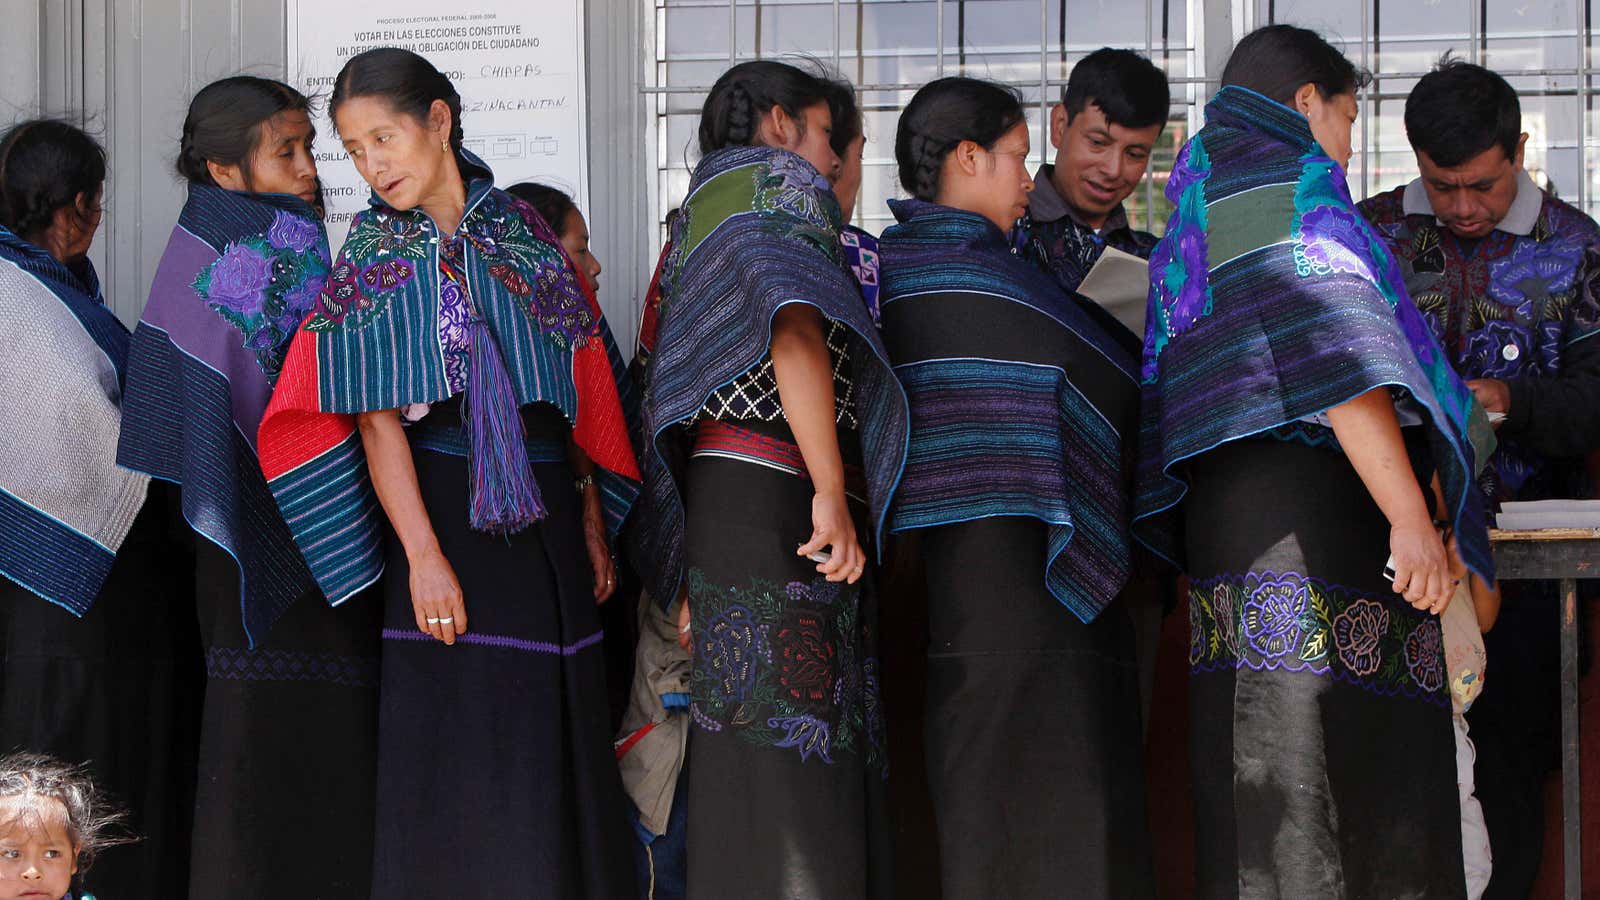 Eager voters in Chiapas.